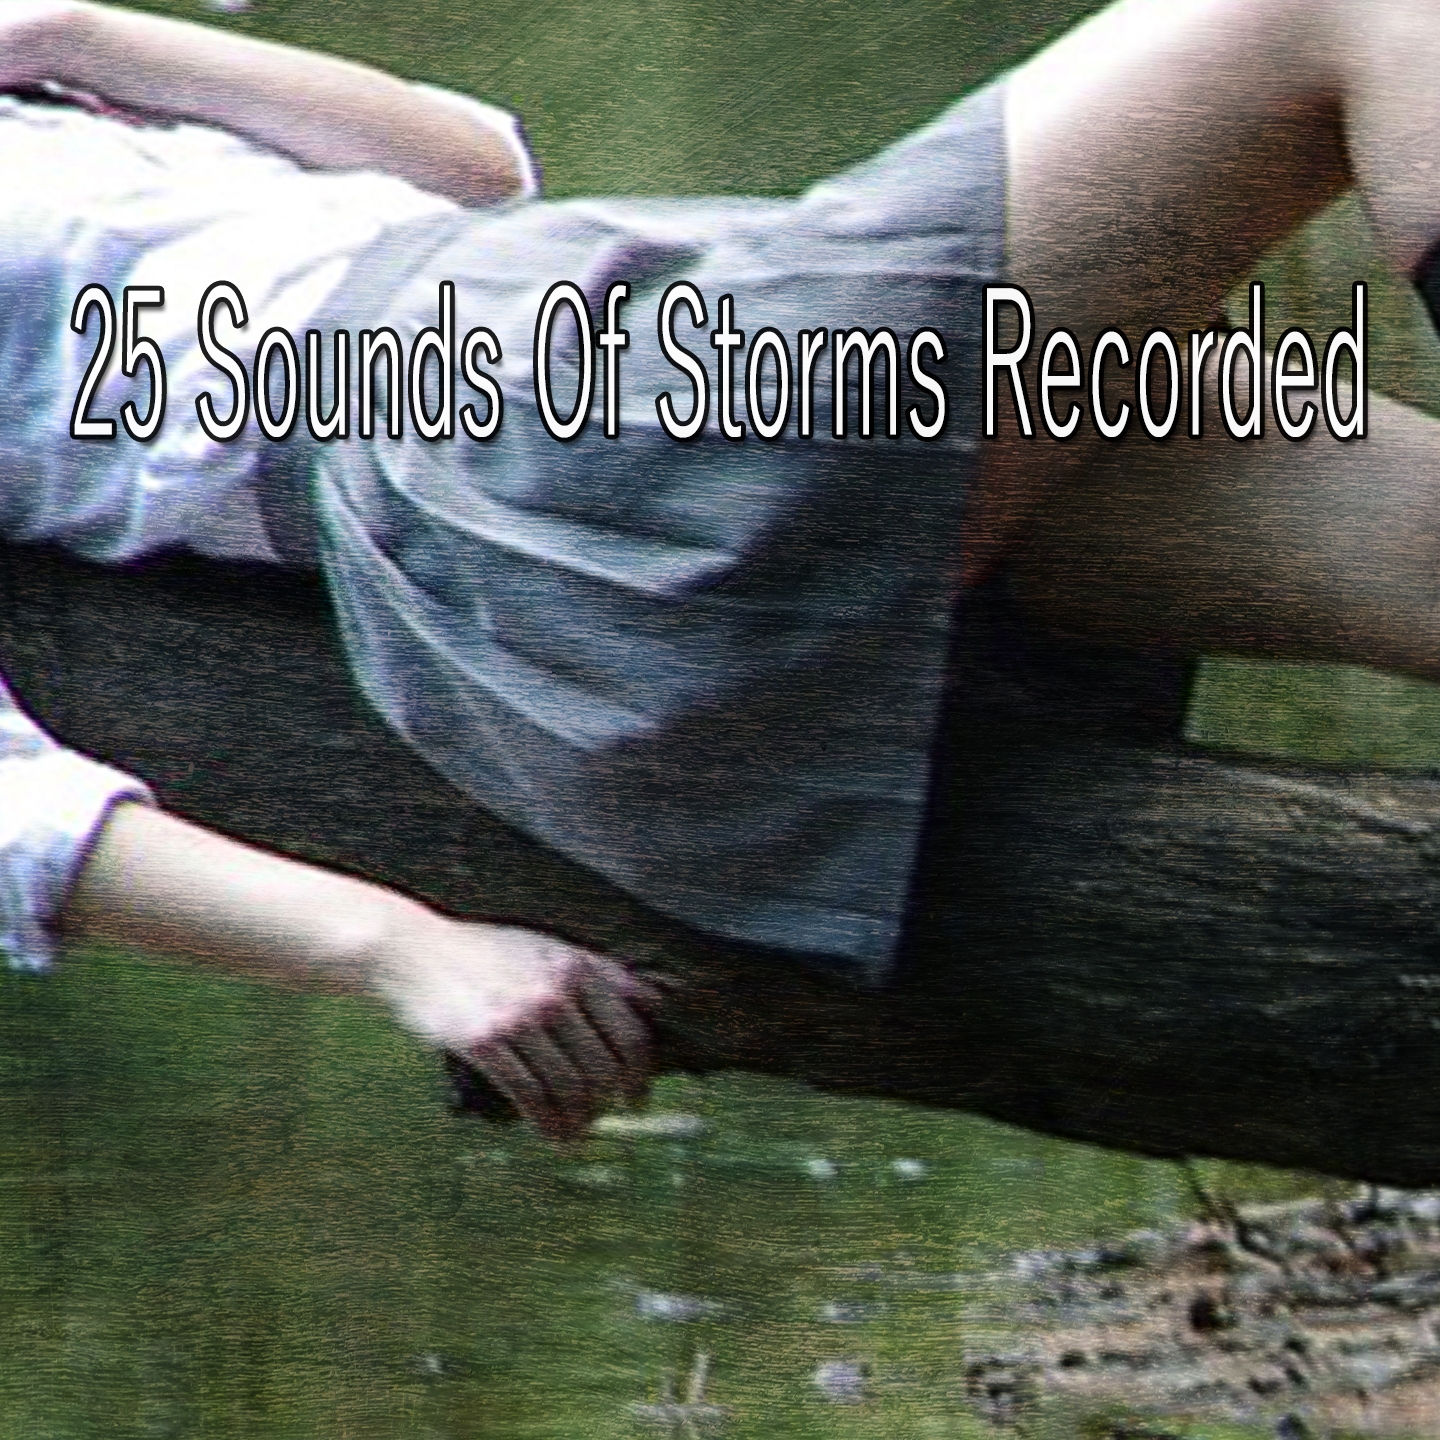 25 Sounds Of Storms Recorded